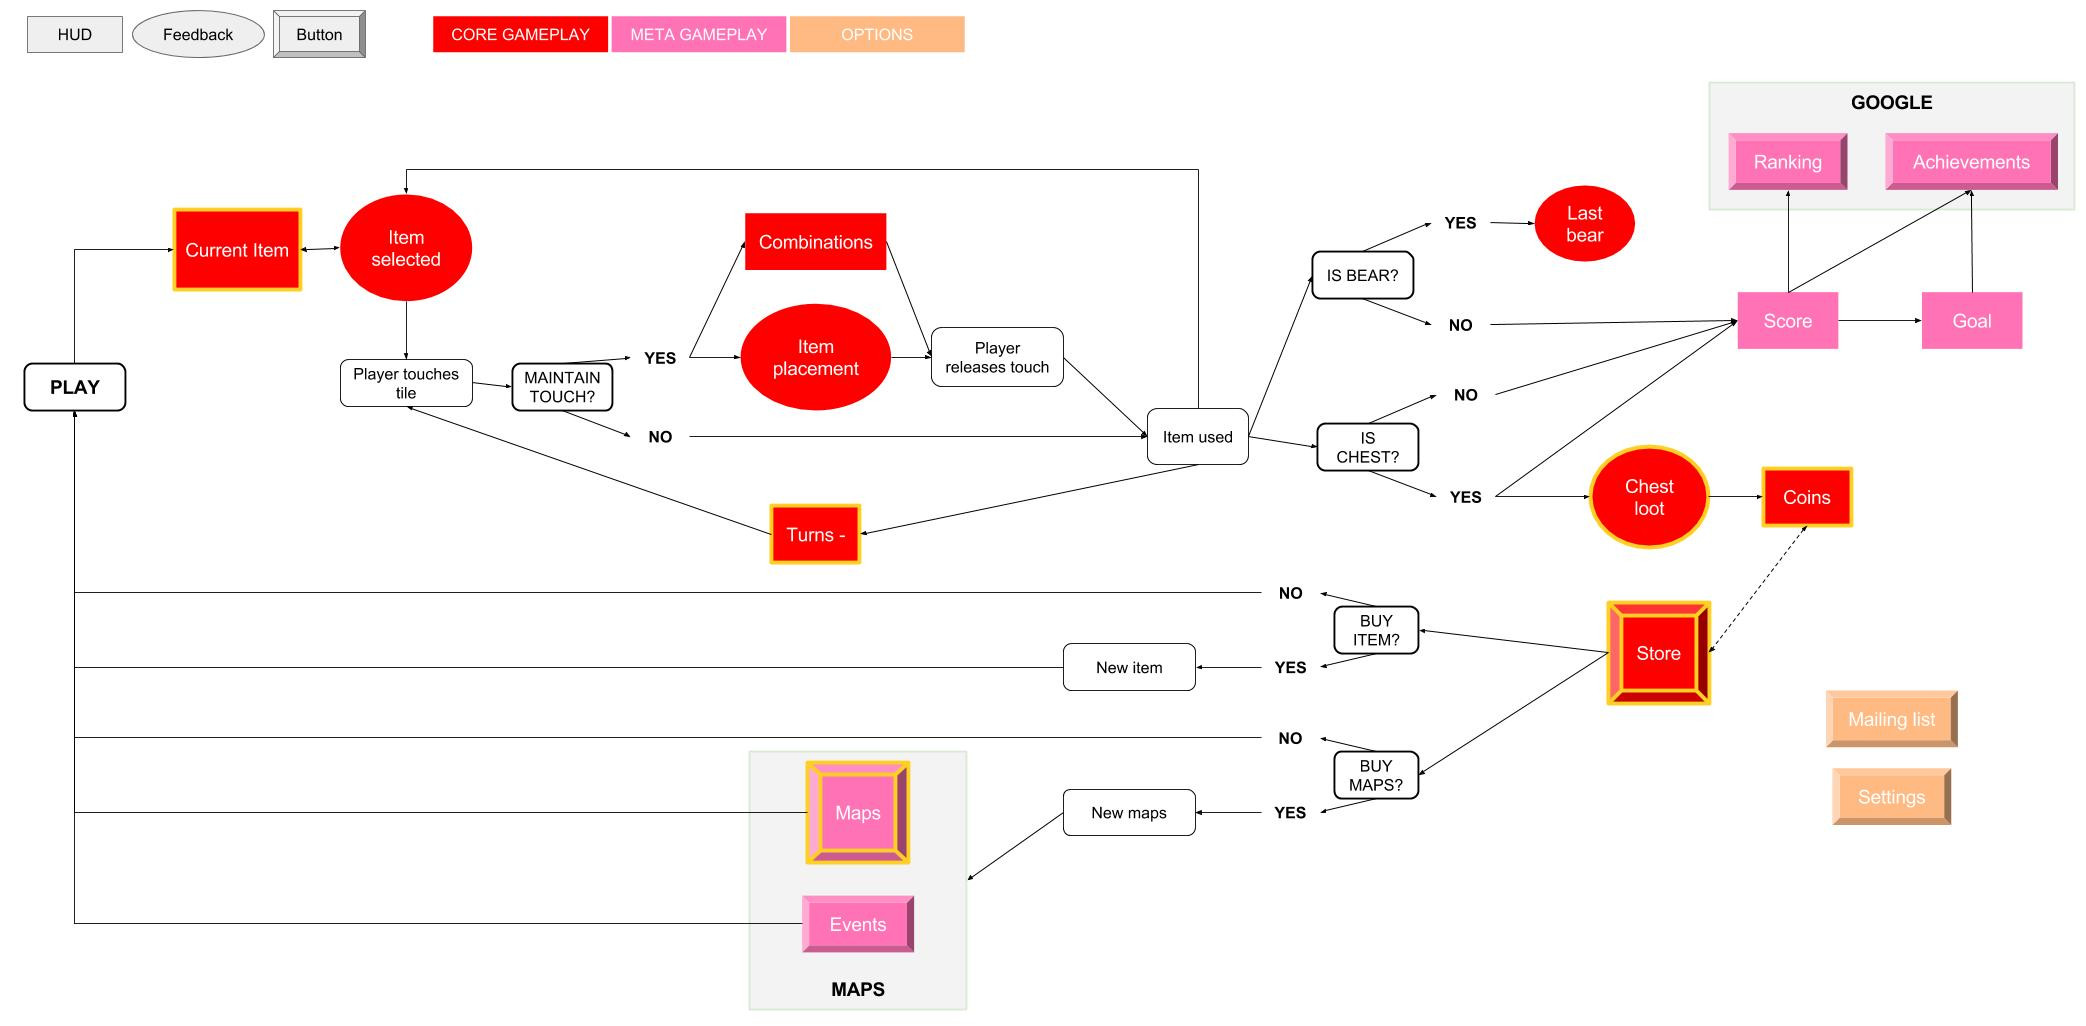 Simple flowchart of the interactions around the core gameplay of the game, based on the list above.
This can help to communicate with the team and see more easily connections and redundant items in the present interface (such as the current item button).